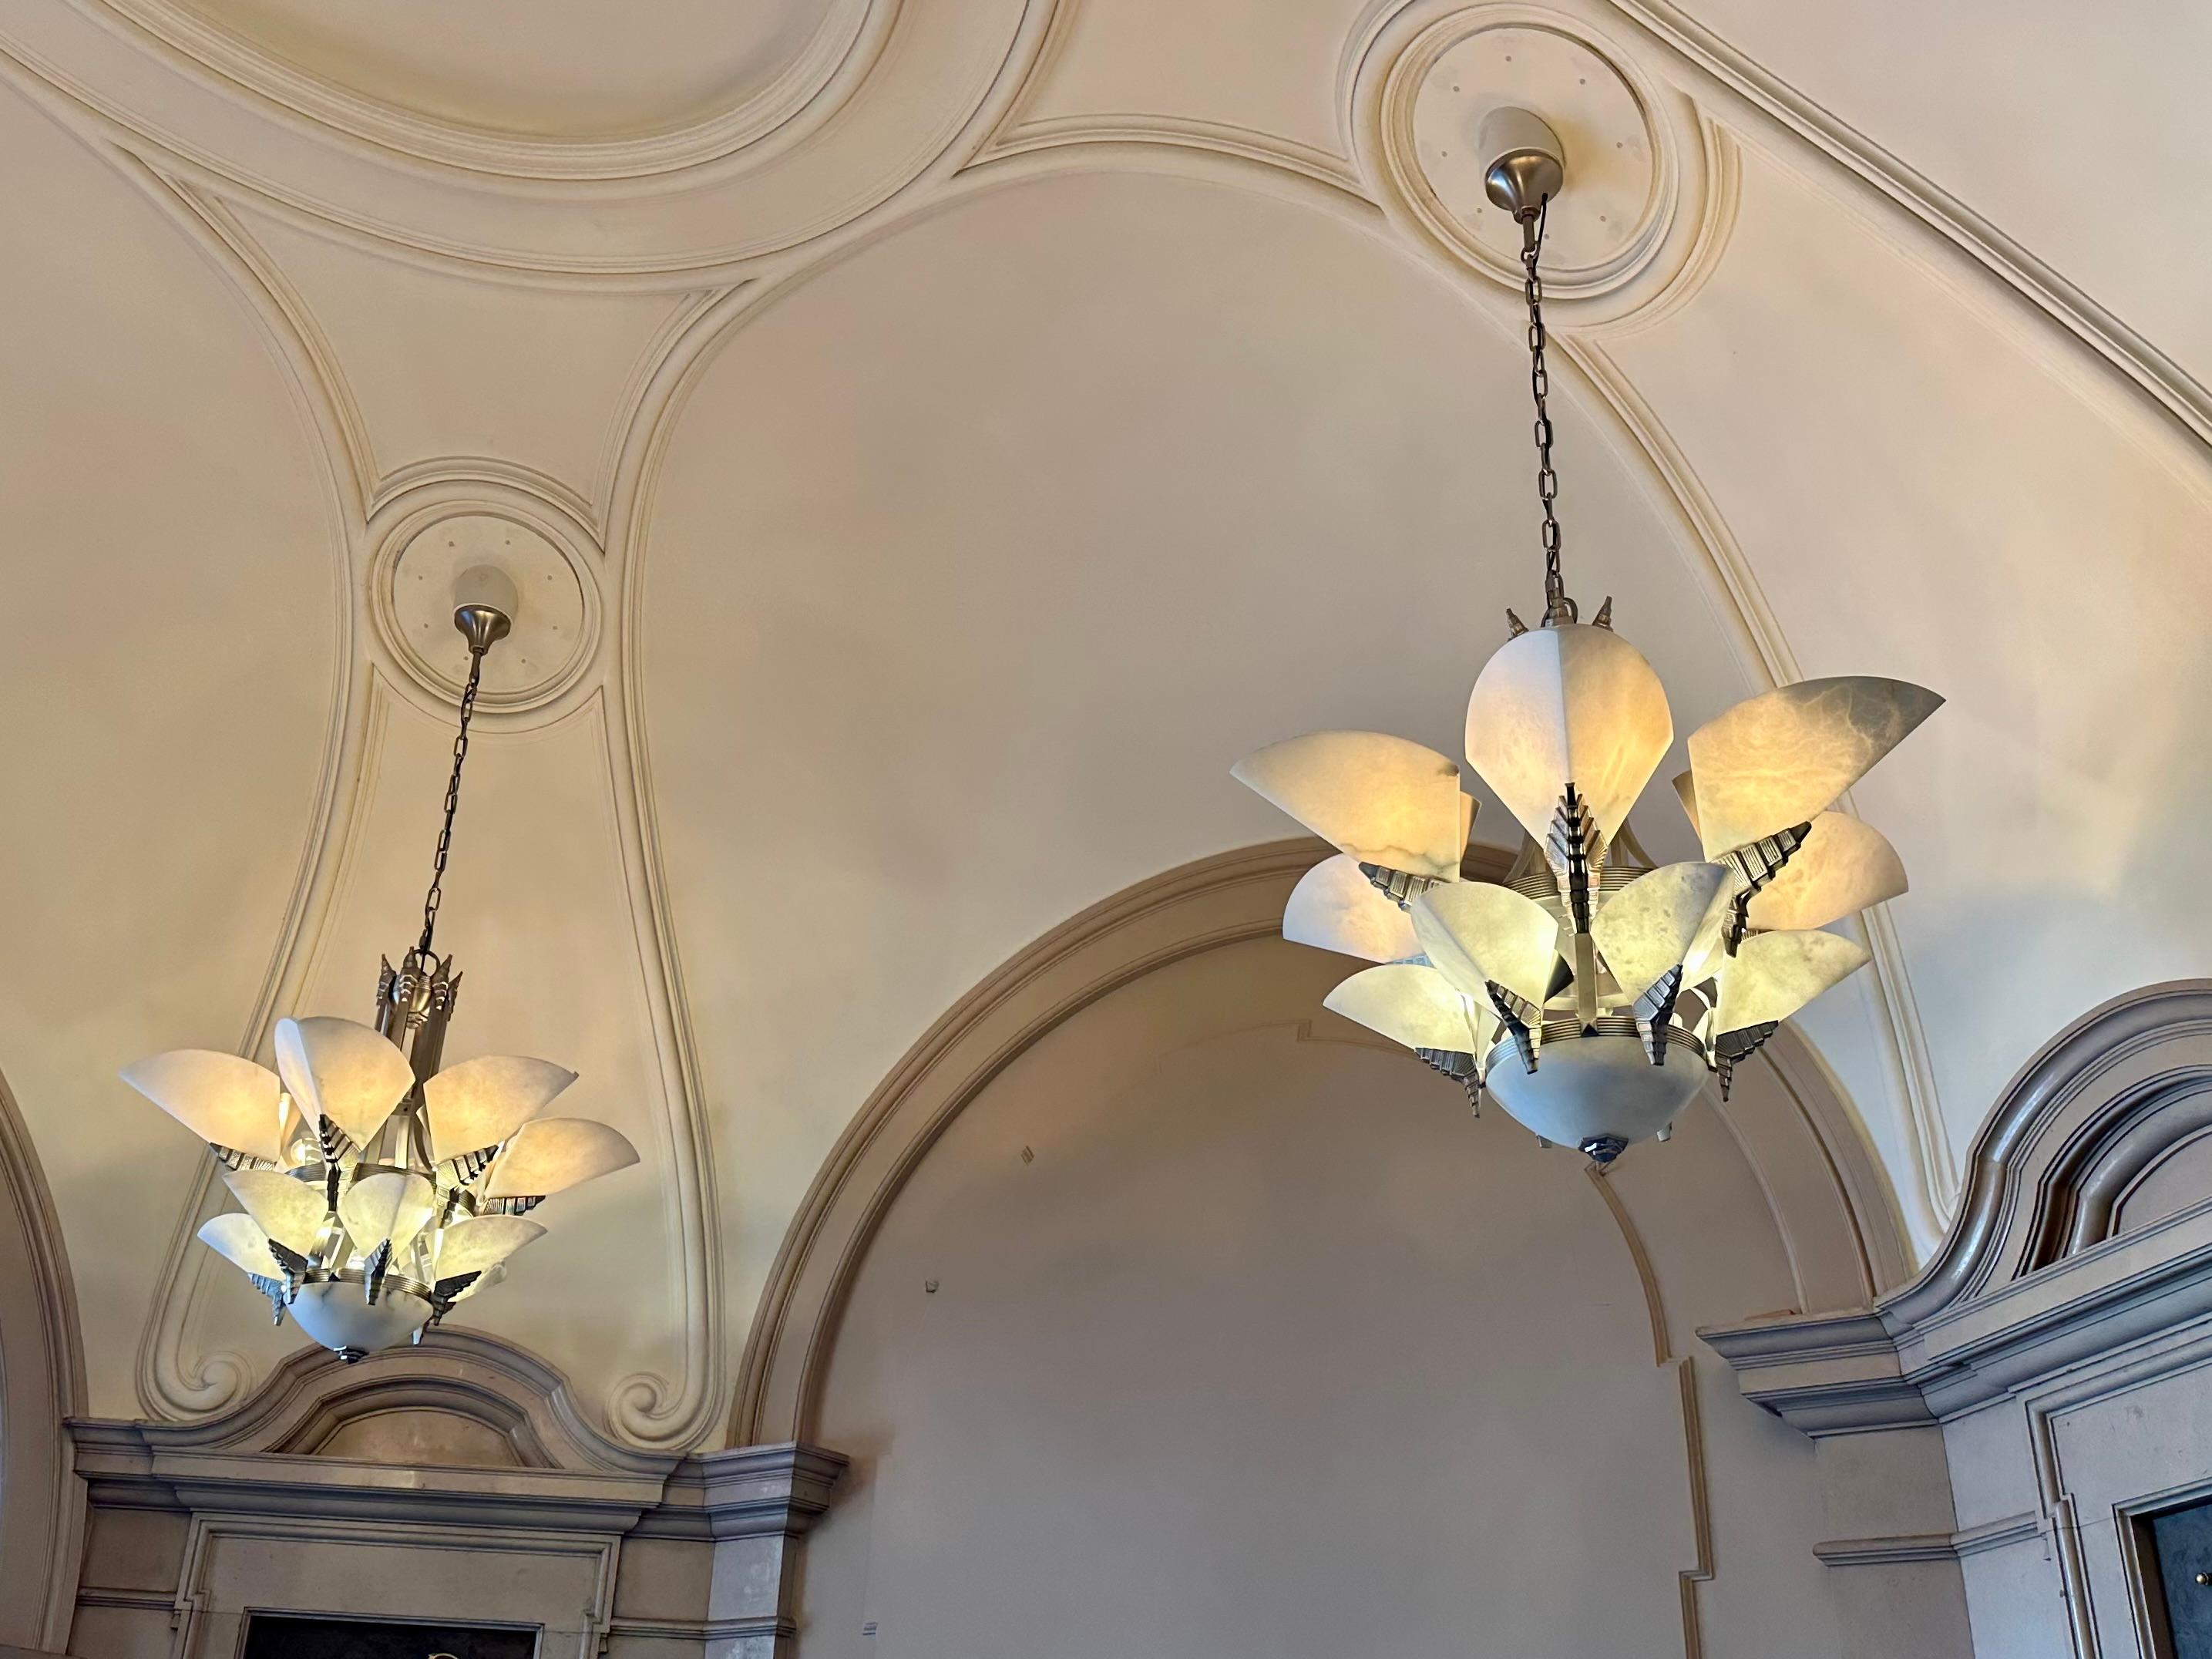 For many years, this Art Deco Style chandeliers adorned an entrance of the prestigious 5-star Grand Hotel 